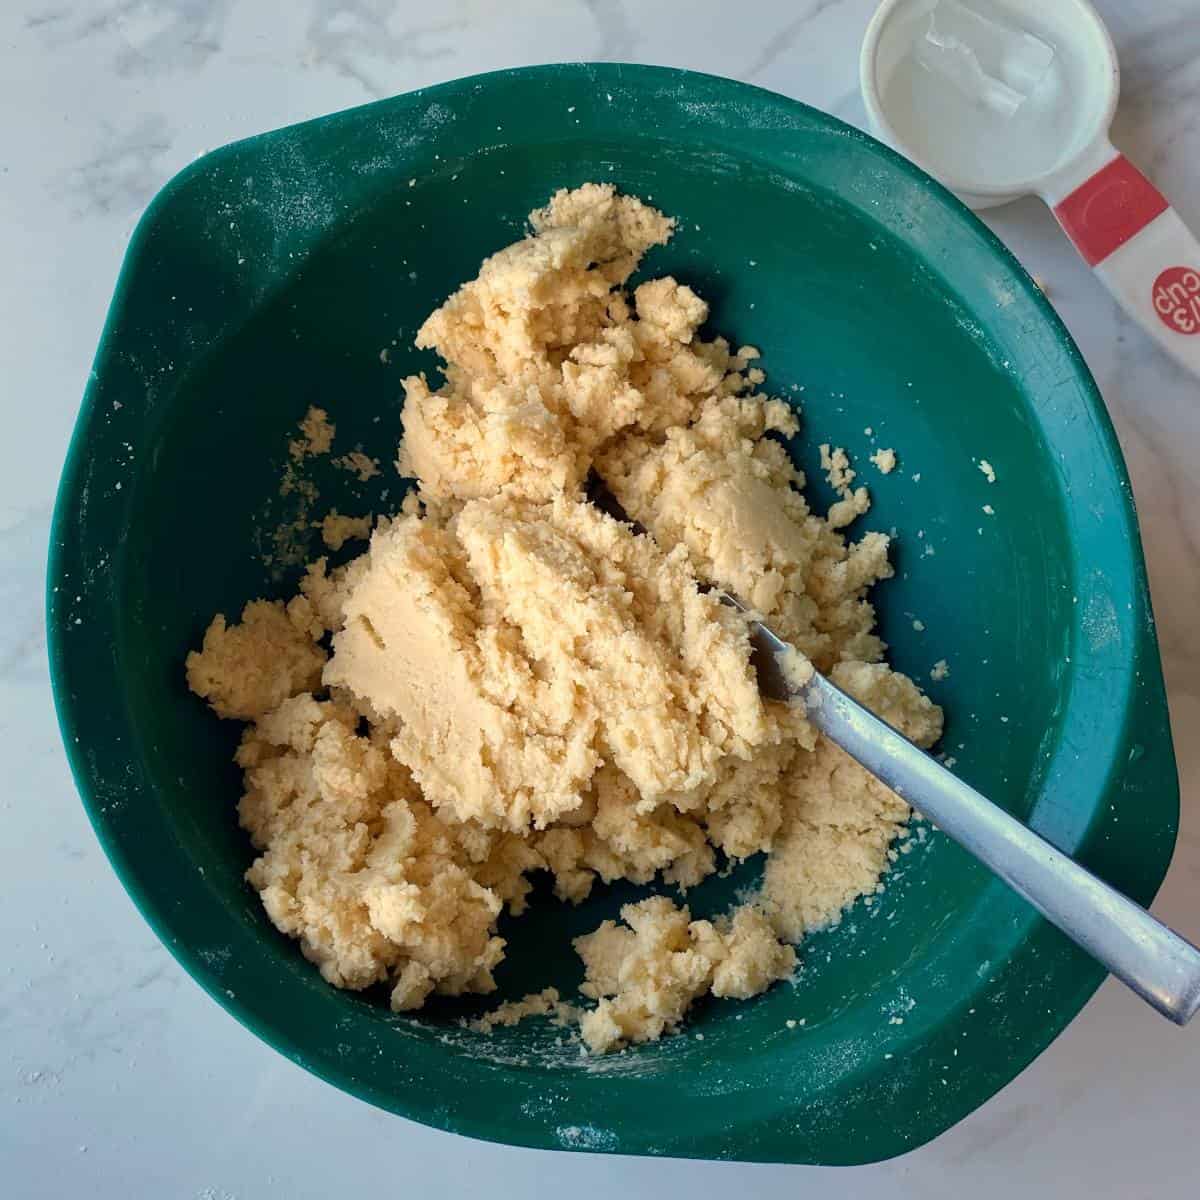 The mixture for short crust pastry in a green mixing bowl